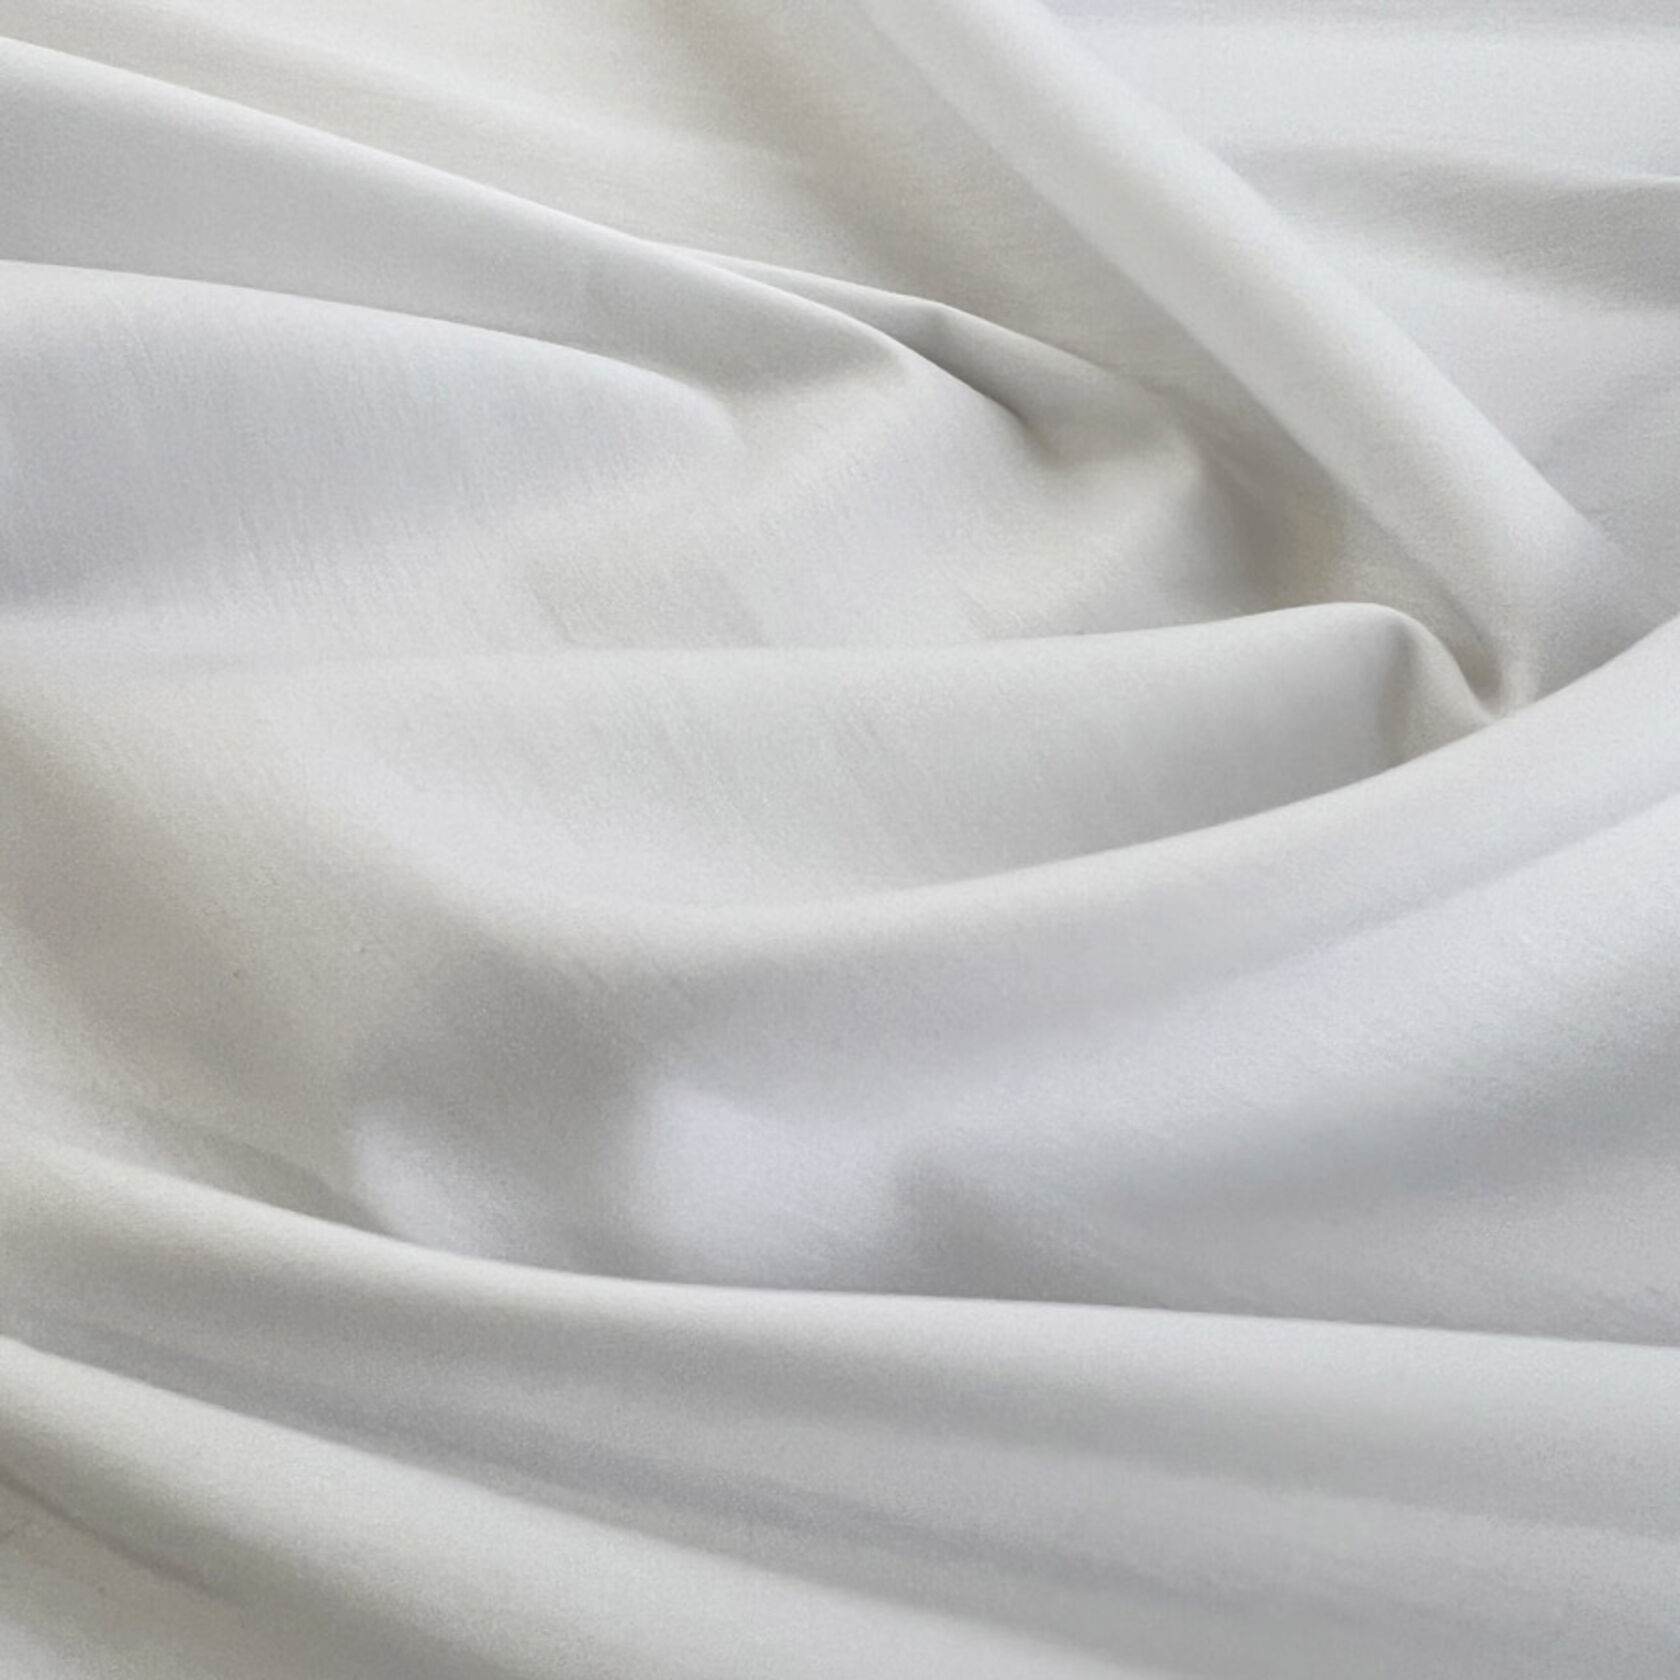 Is Polyamide Stretchy? (How To Stretch Polyamide Fabric)